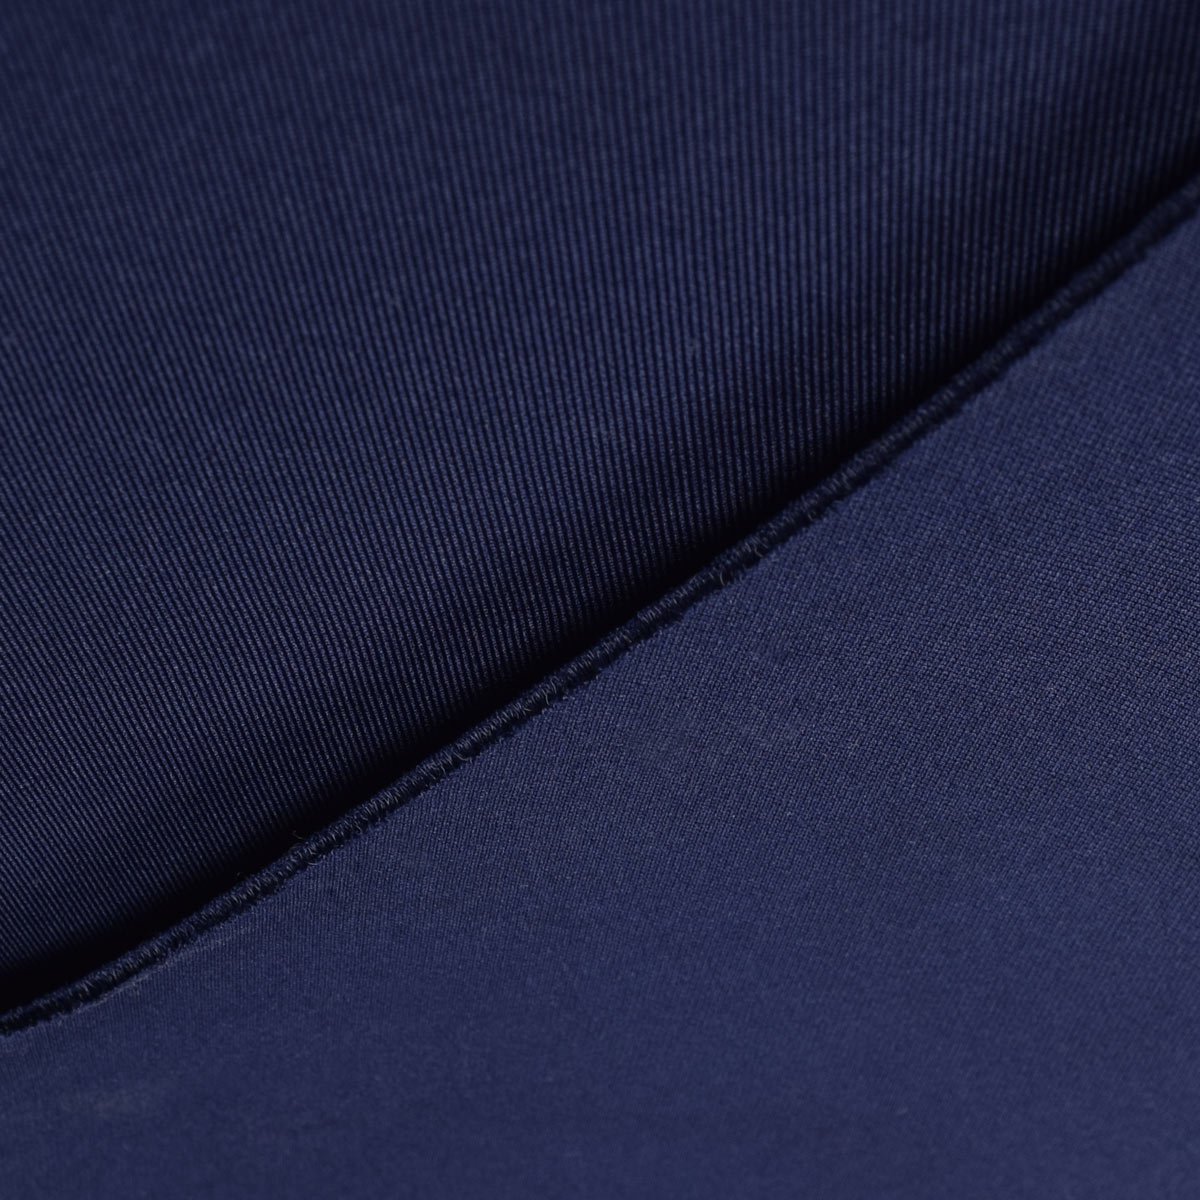 2mm Blue Neoprene Fabric Wetsuit Material For Sewing